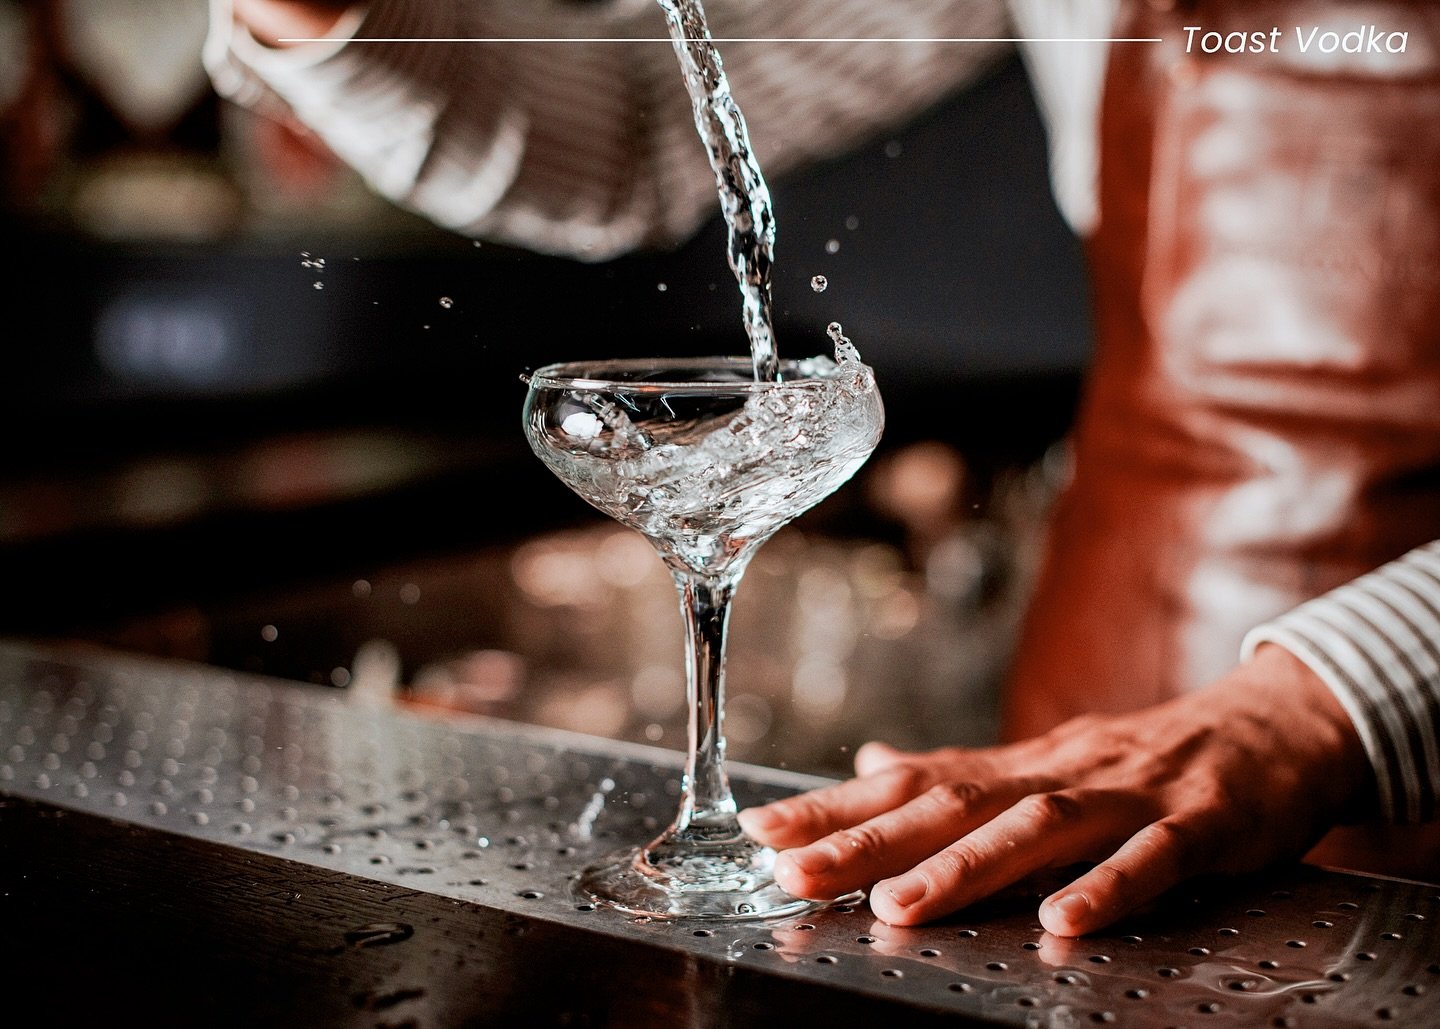 Even on a Tuesday, every sip of Toast Vodka is a celebration. Cheers to making ordinary moments extraordinary! 🍸✨ 

#TuesdayToast #toastvodka #explorepage